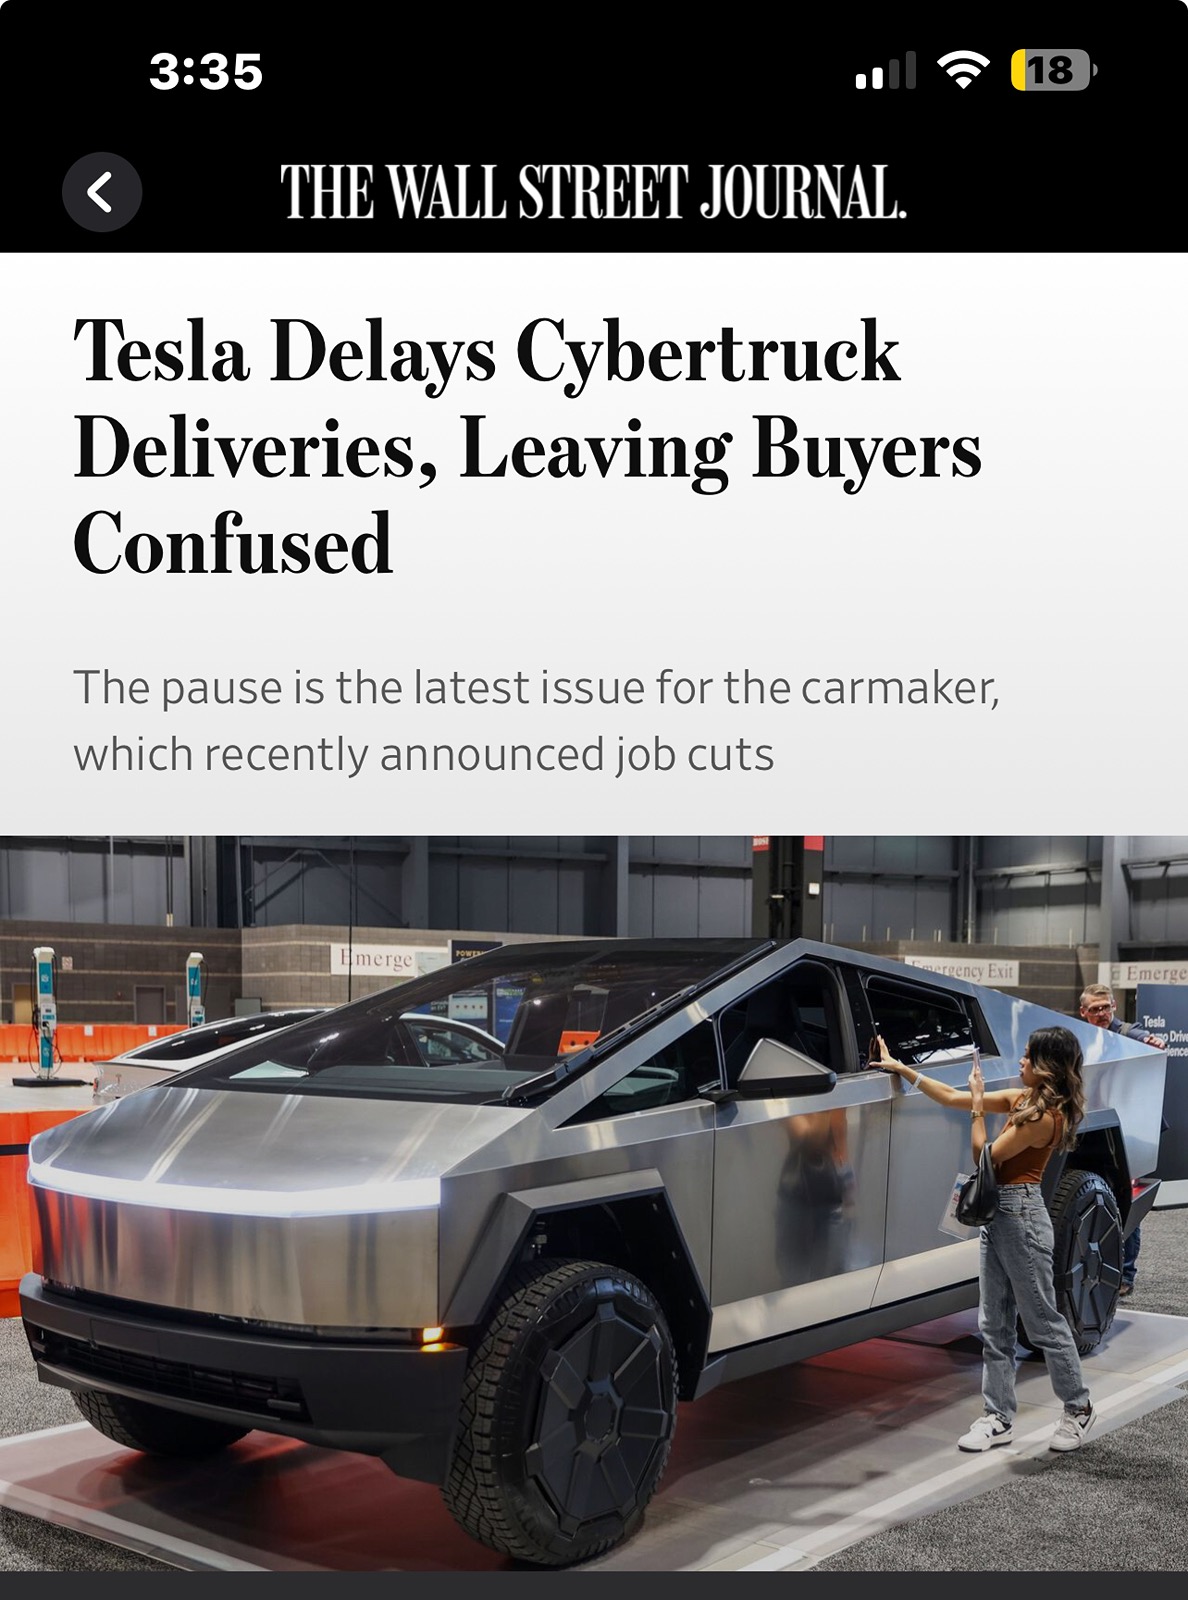 Tesla Cybertruck Early delivery of Foundation Series Cybertruck now available to long-term verified TSLA shareholder! 1713299884697-84